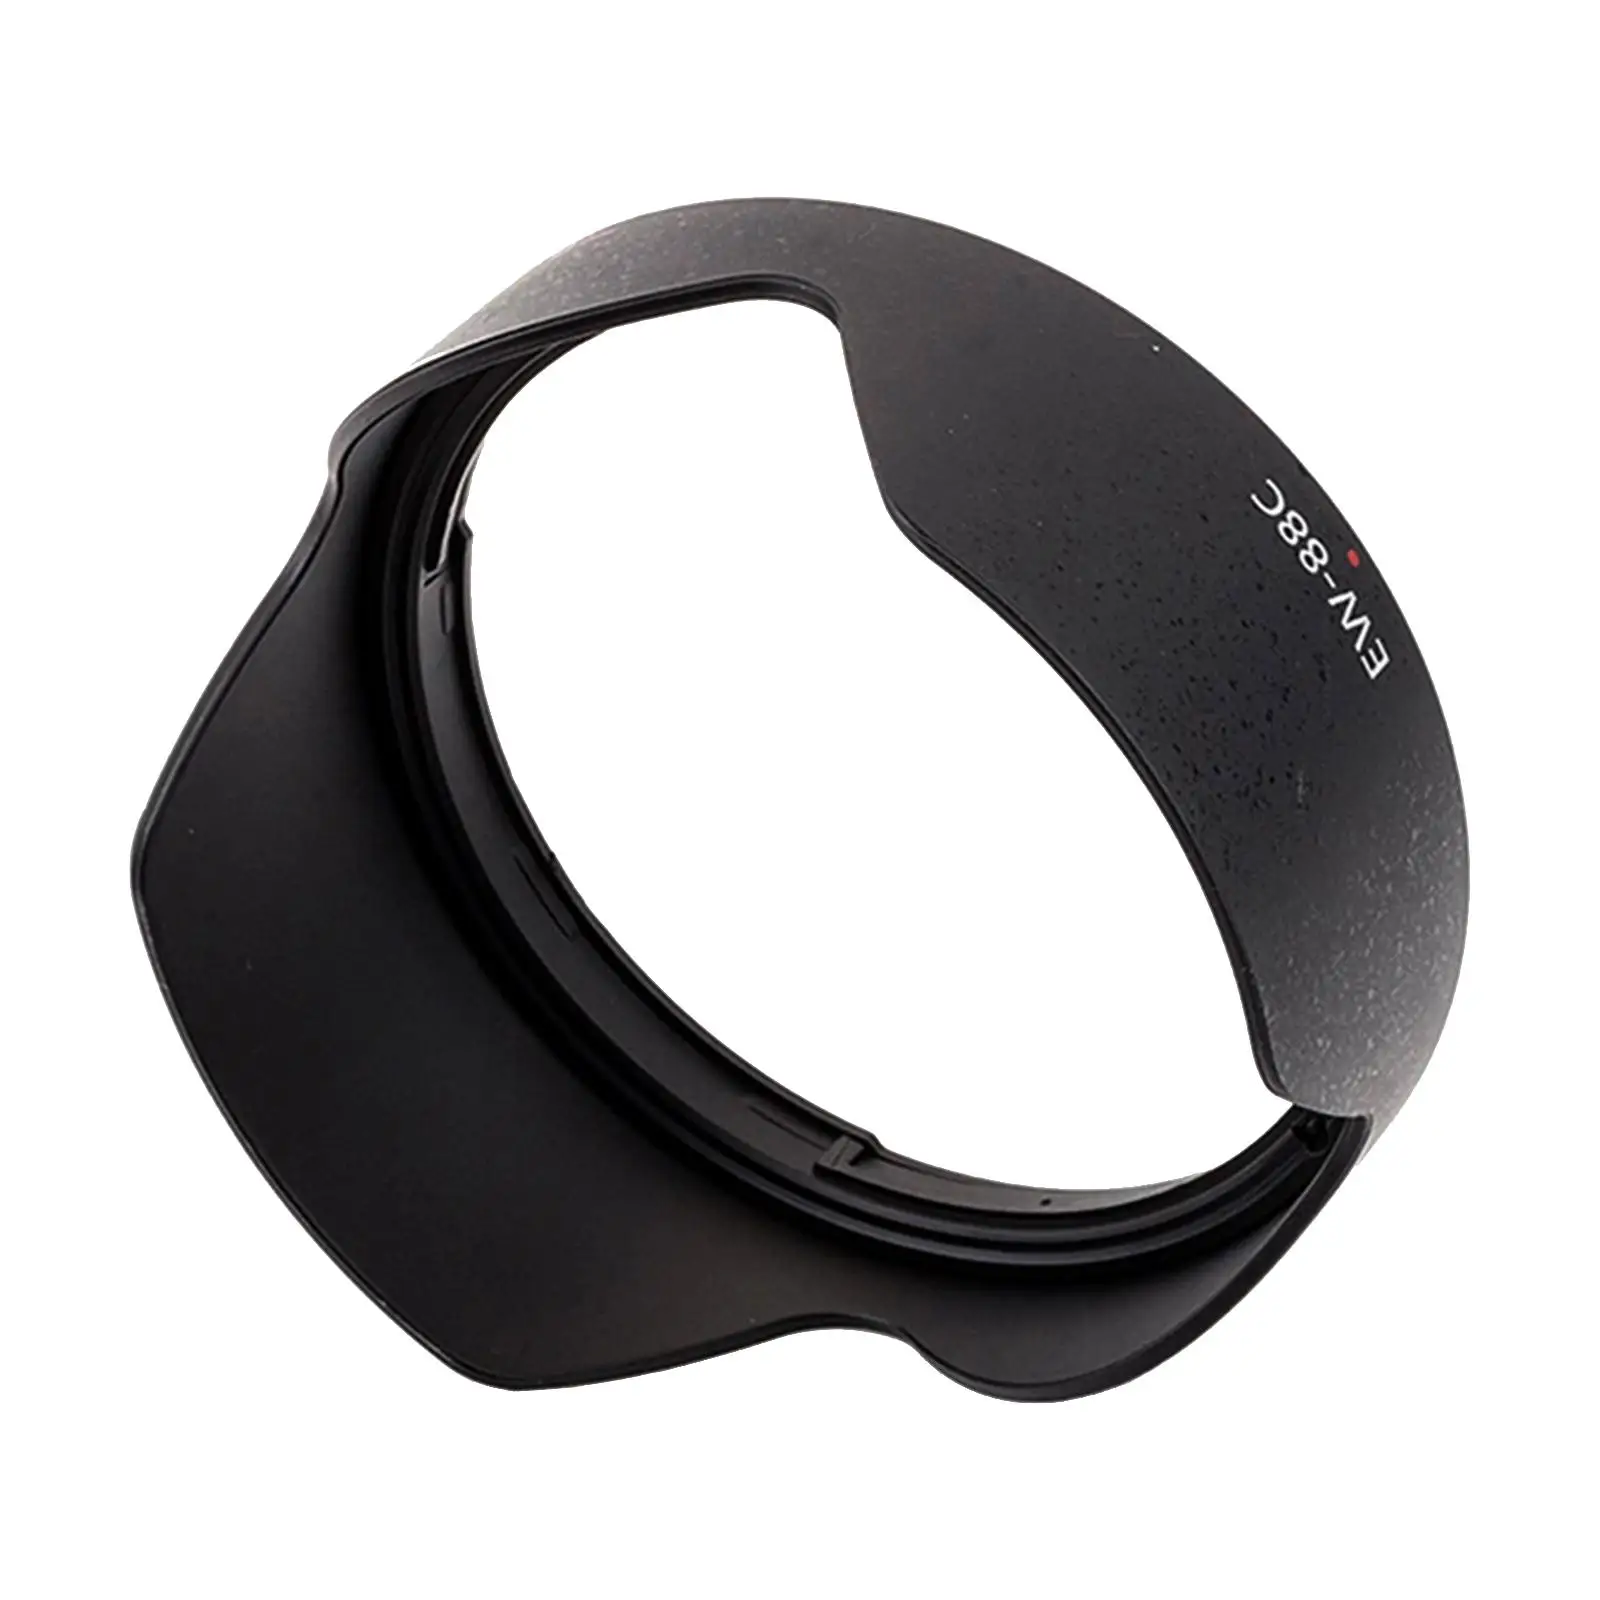 Lens Hood Cover Replacement Parts Snap on Mounting Lens Hood Protector Digital Camera for EW-88C 24-70F2.8II 6D 5D3 5D4